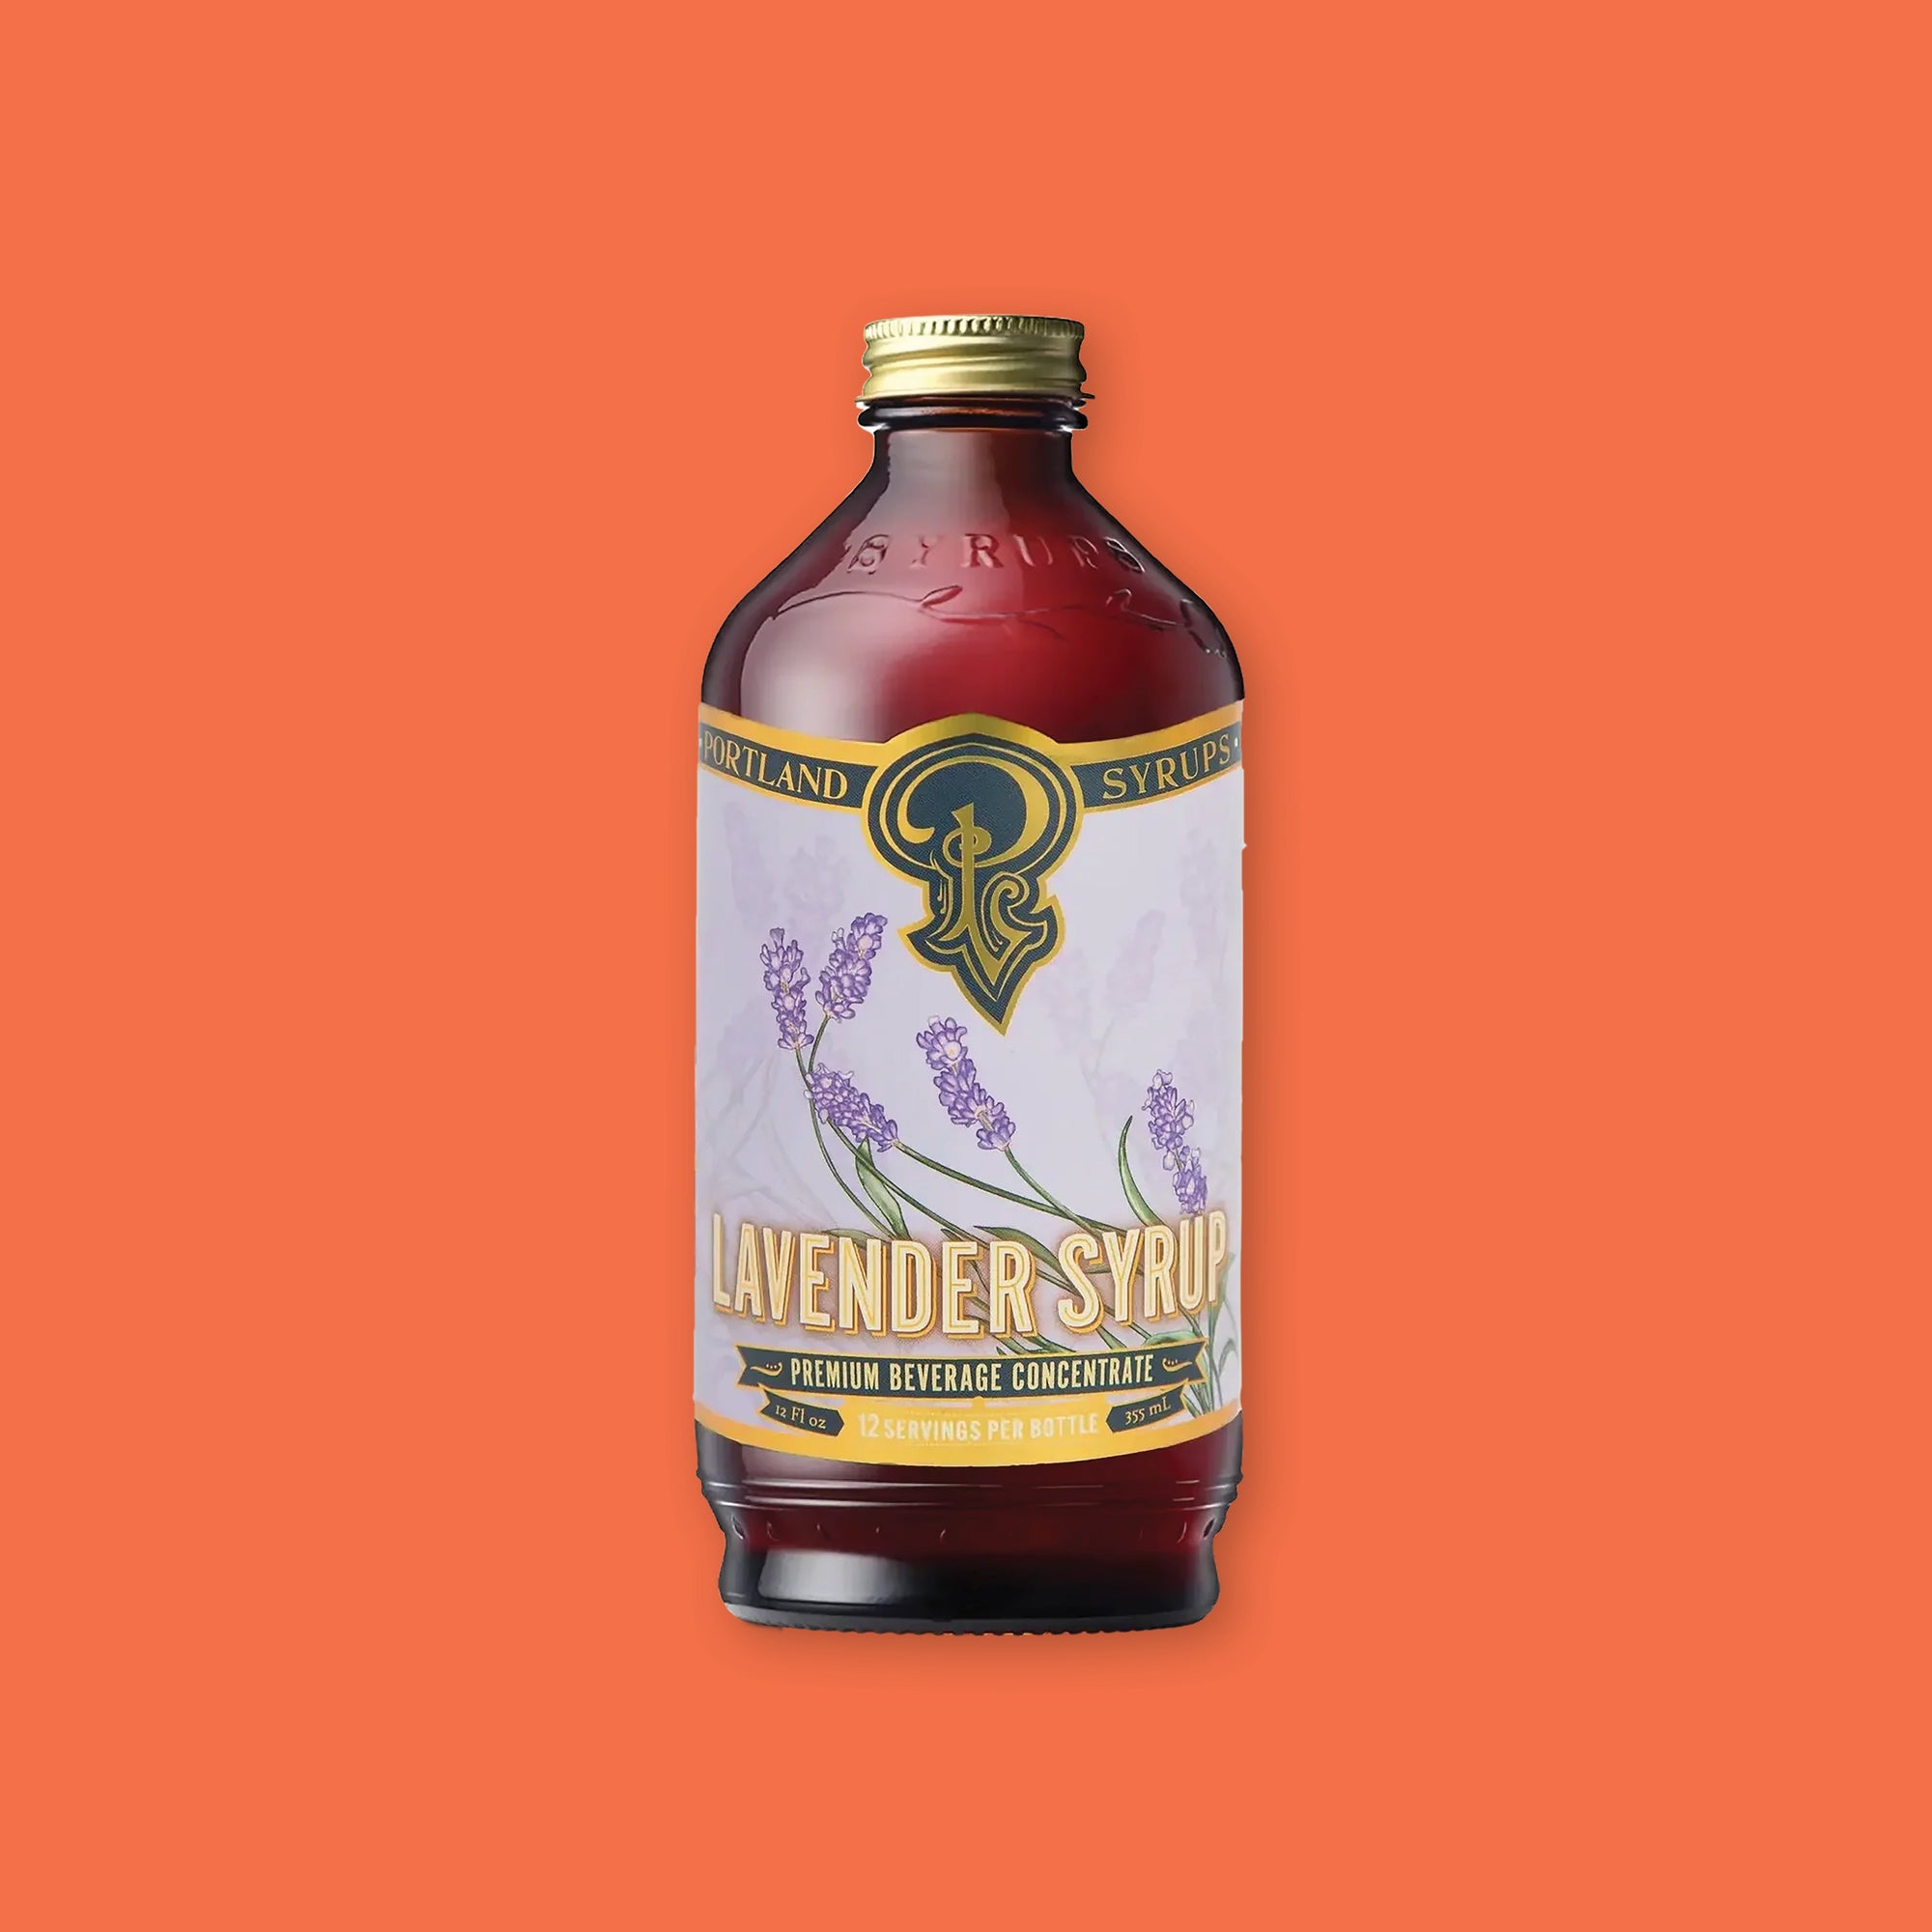 On an orangey-red background sits a bottle. This brown bottle has a gold top and colorful label. It says in gold "PORTLAND SYRUPS" in all caps serif font. It has an illustration of lavender on a light purple background and it says "LAVENDER SYRUP" in white and gold, all caps block font. It also says "PREMIUM BEVERAGE CONCENTRATE" in gold, all caps block font. 12 servings per bottle. 12 Fl oz 355 mL